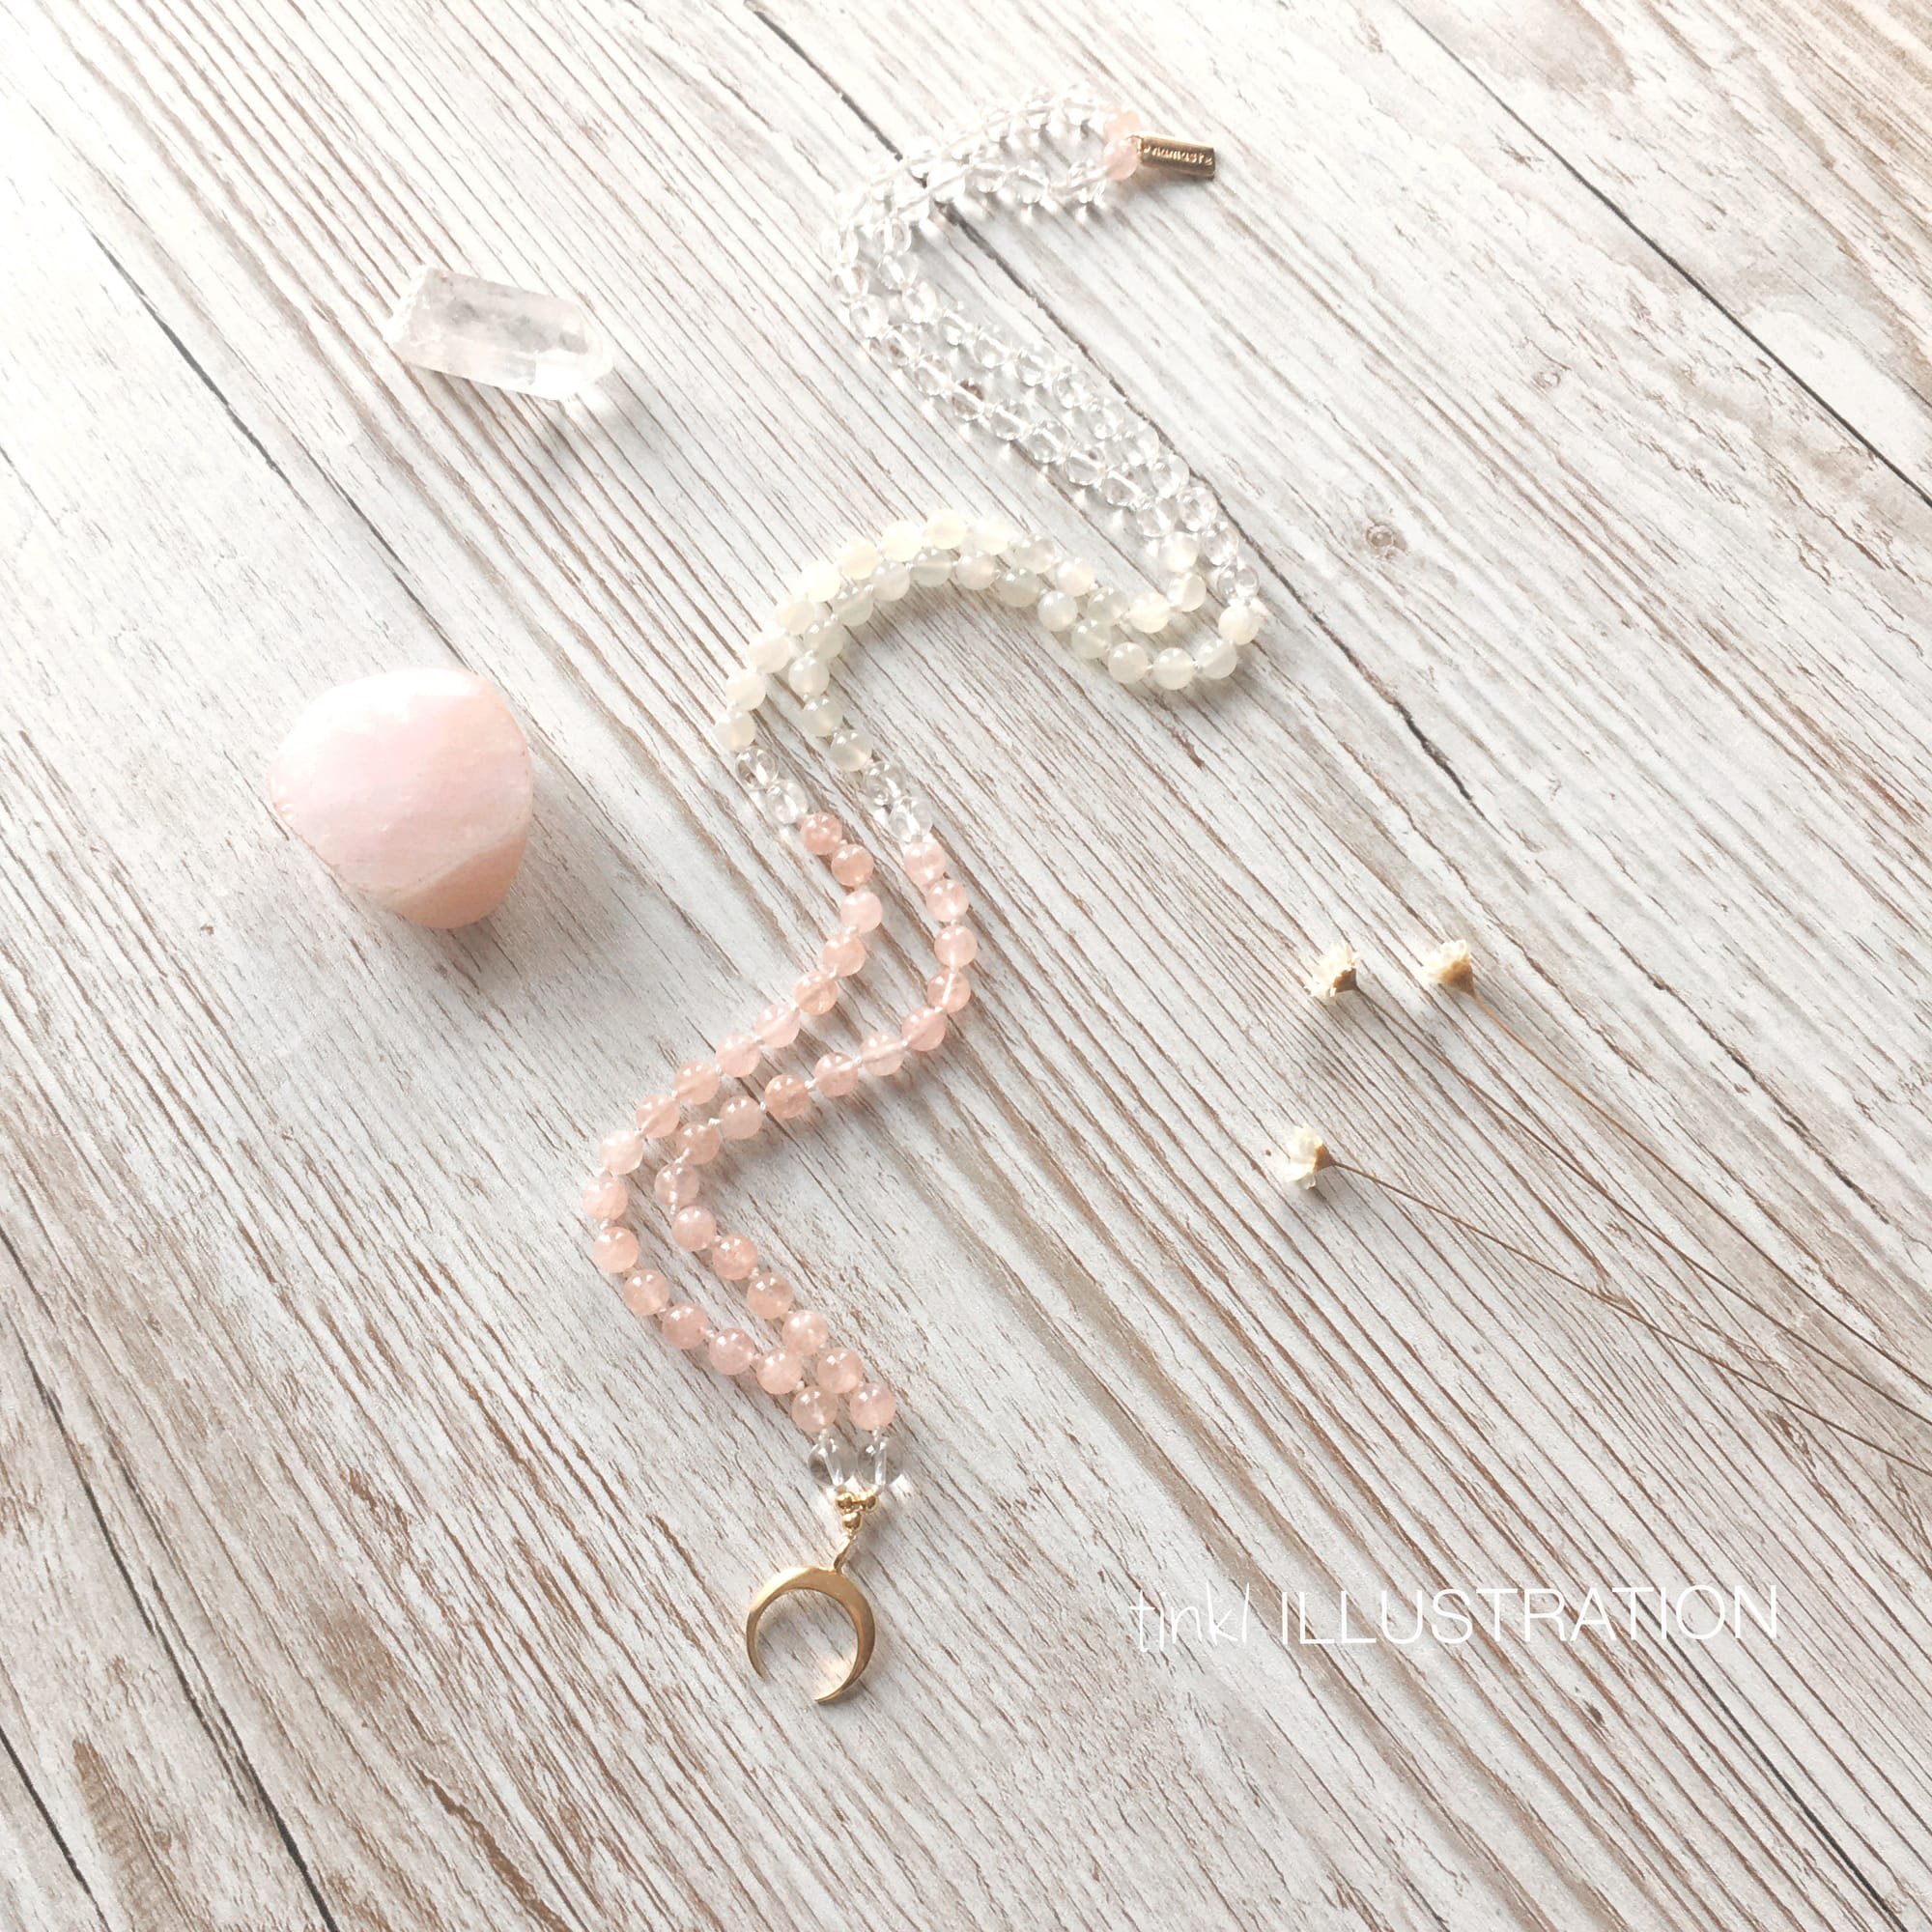 Bespoke Mala Necklace With Morganite and Clear Quartz